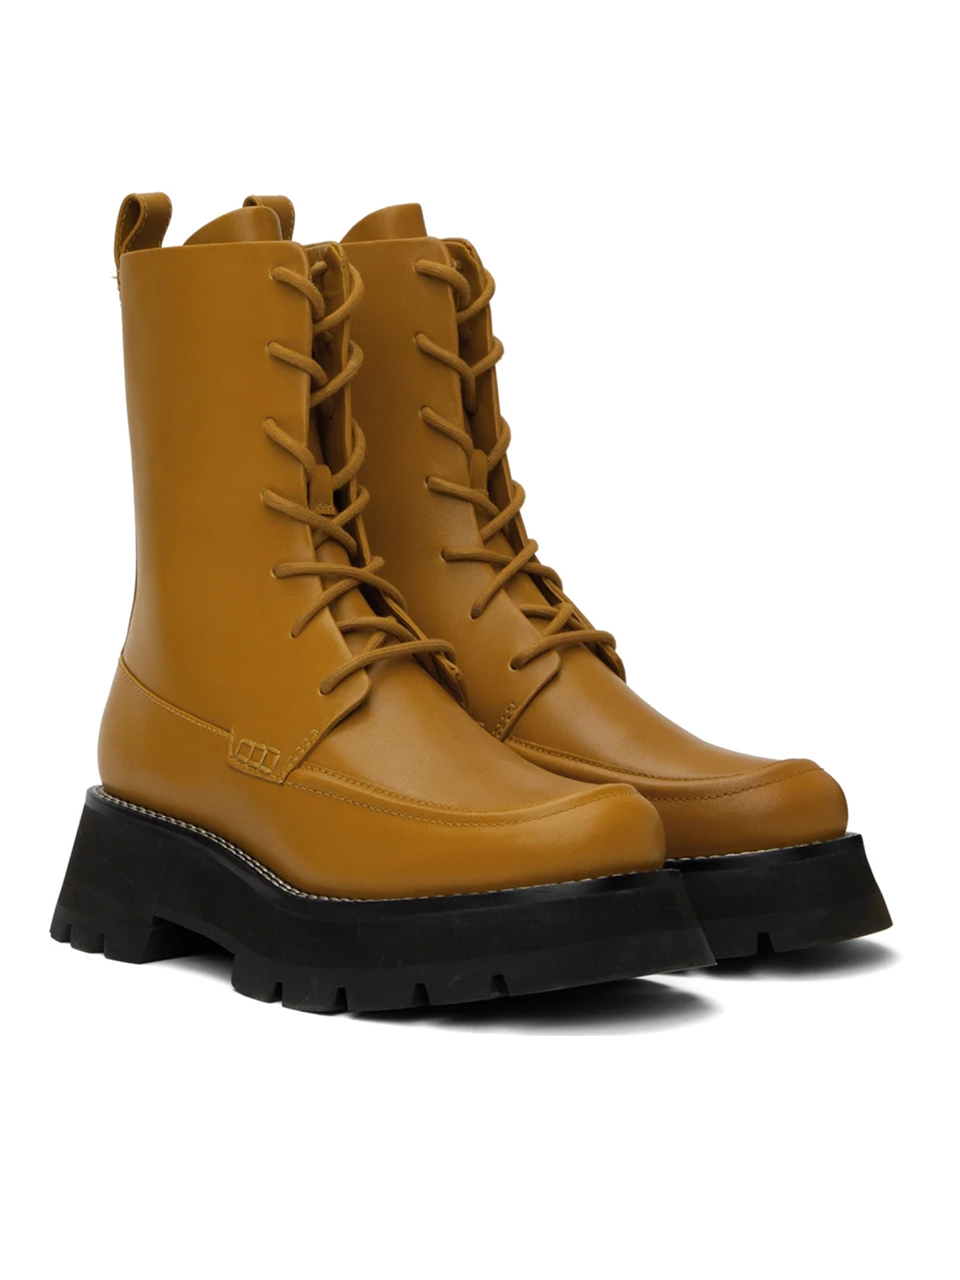 3.1 PHILLIP LIM Kate Lace Up Combat Boot in Honey Both Boots Side View 